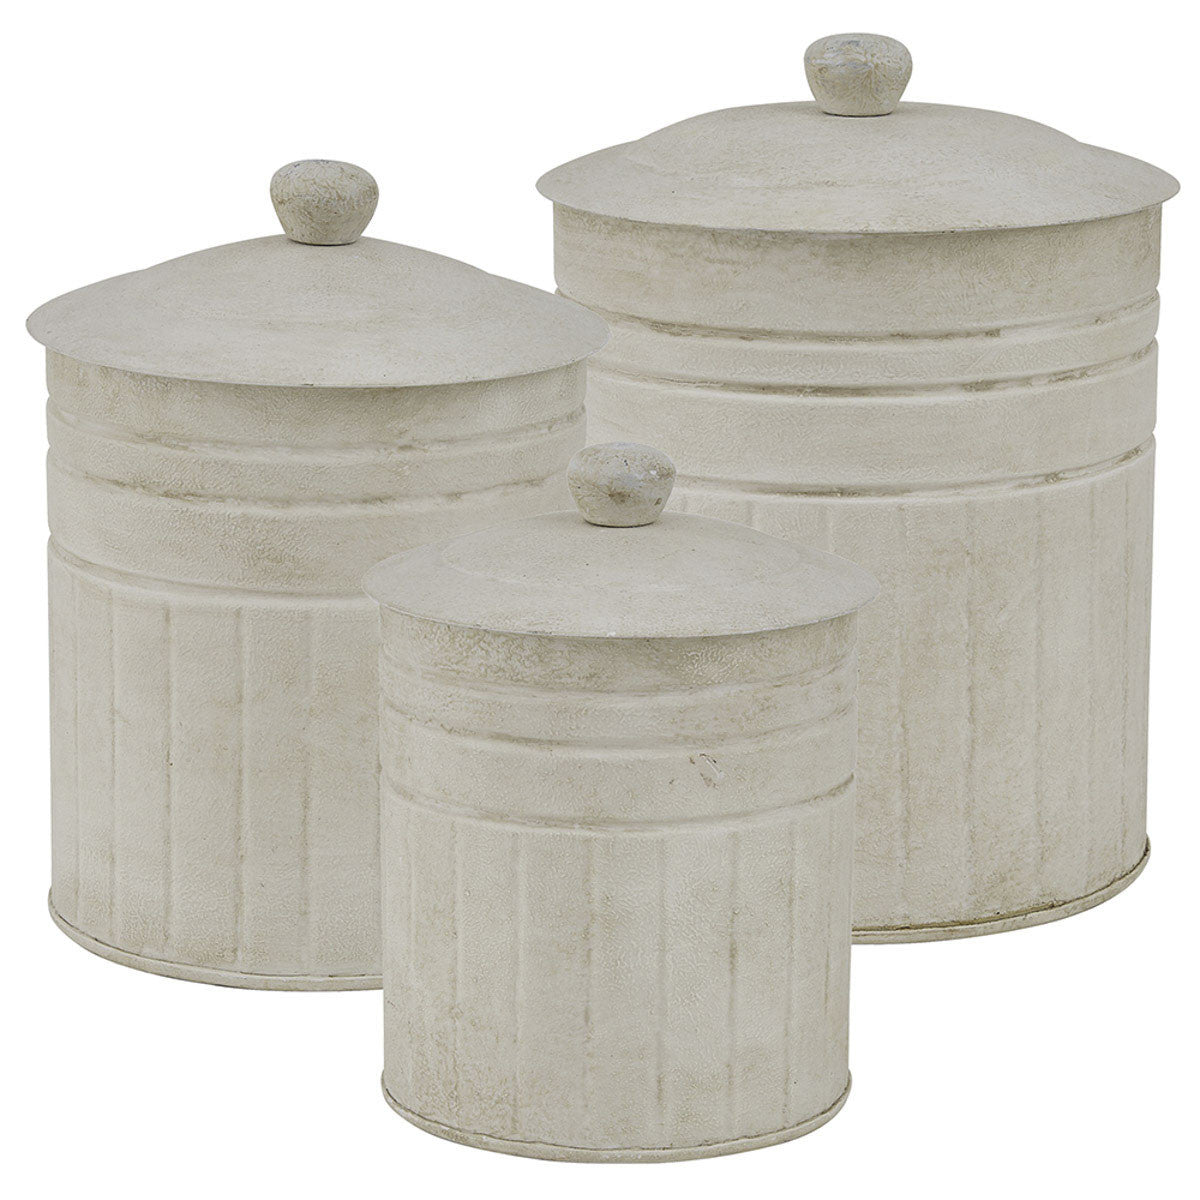 Crimped Canisters - Set of 3 Park Designs